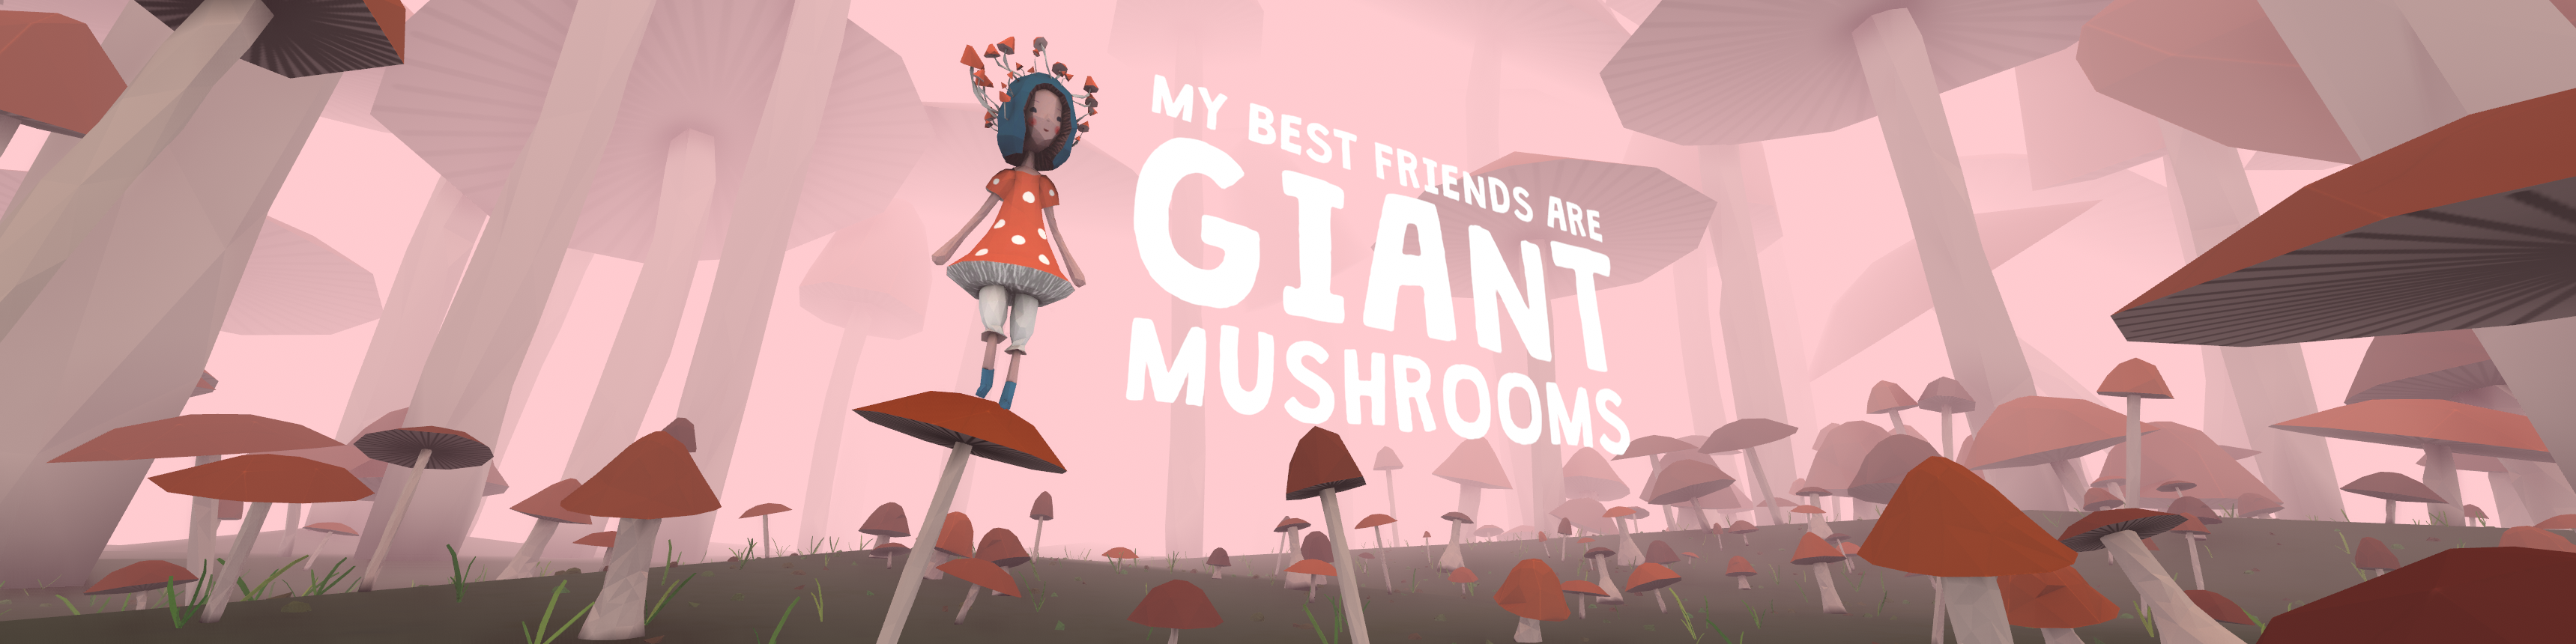 My Best Friends Are Giant Mushrooms (VR Only!)